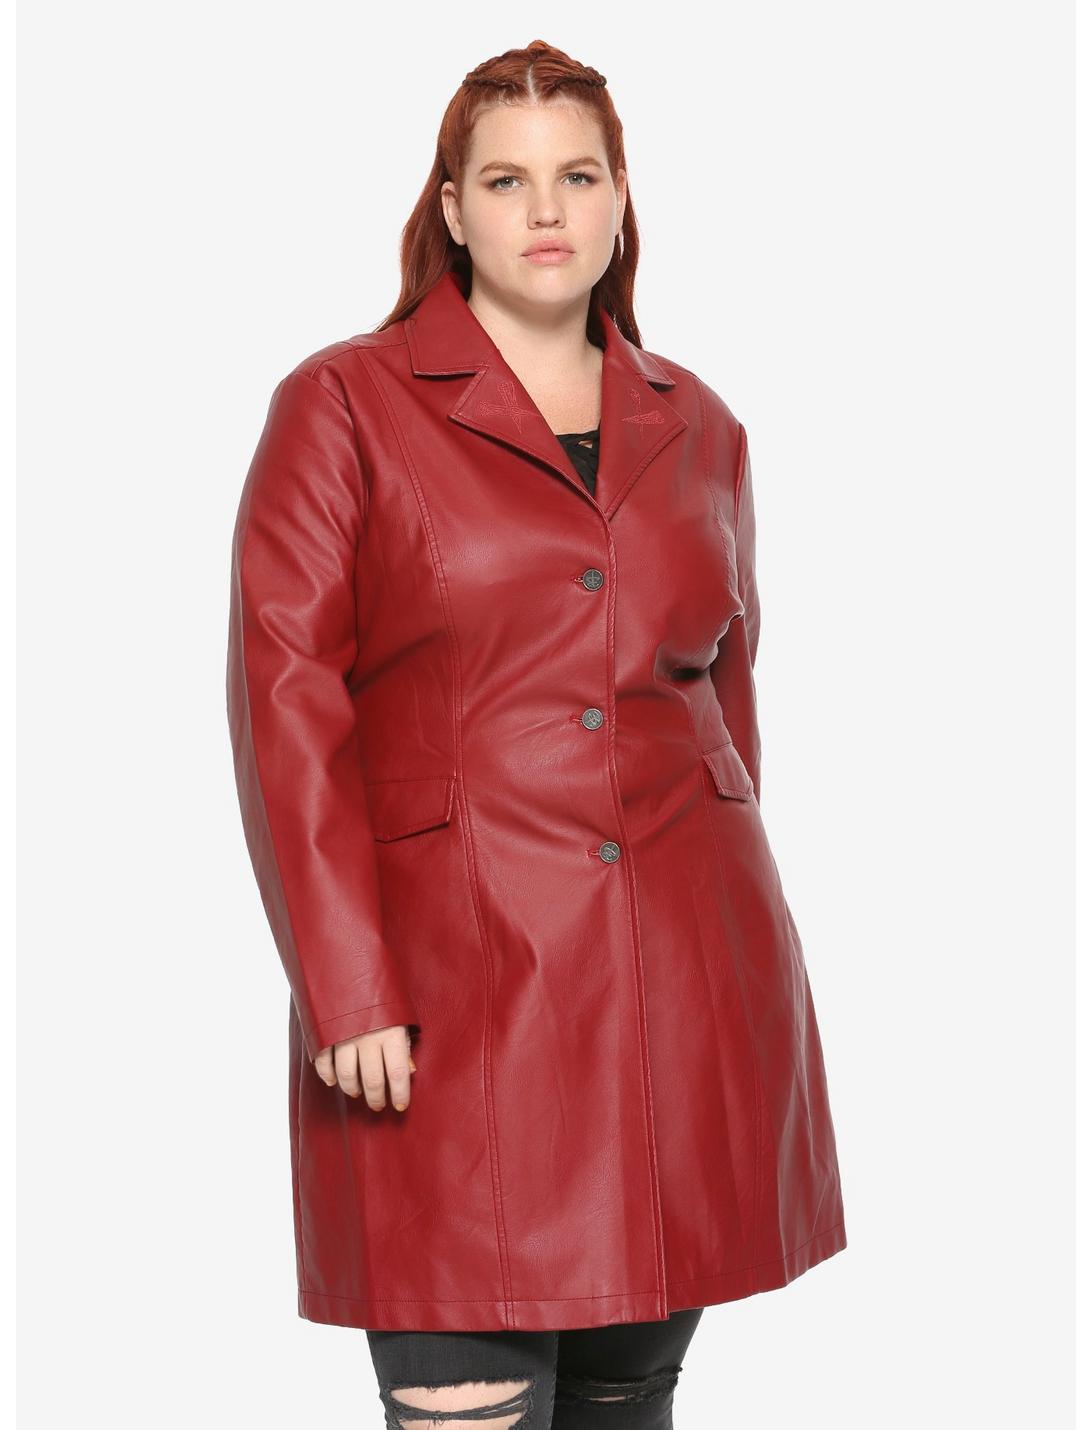 Buffy The Vampire Slayer Girls Trench Coat Plus Size, RED, hi-res